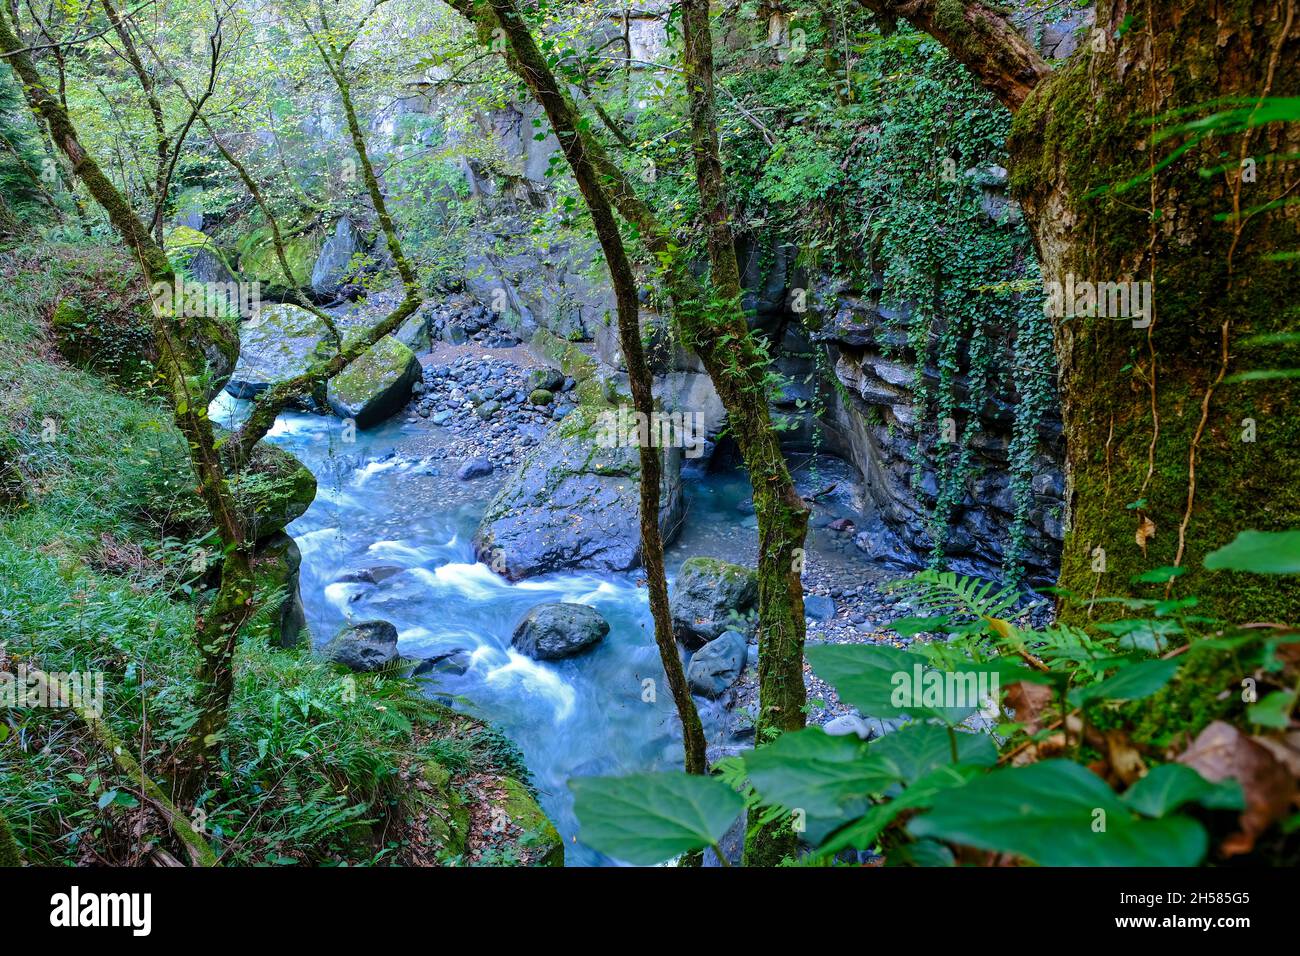 Şavşat district of Artvin province offers wonderful views to its visitors in autumn with its streams. Stock Photo